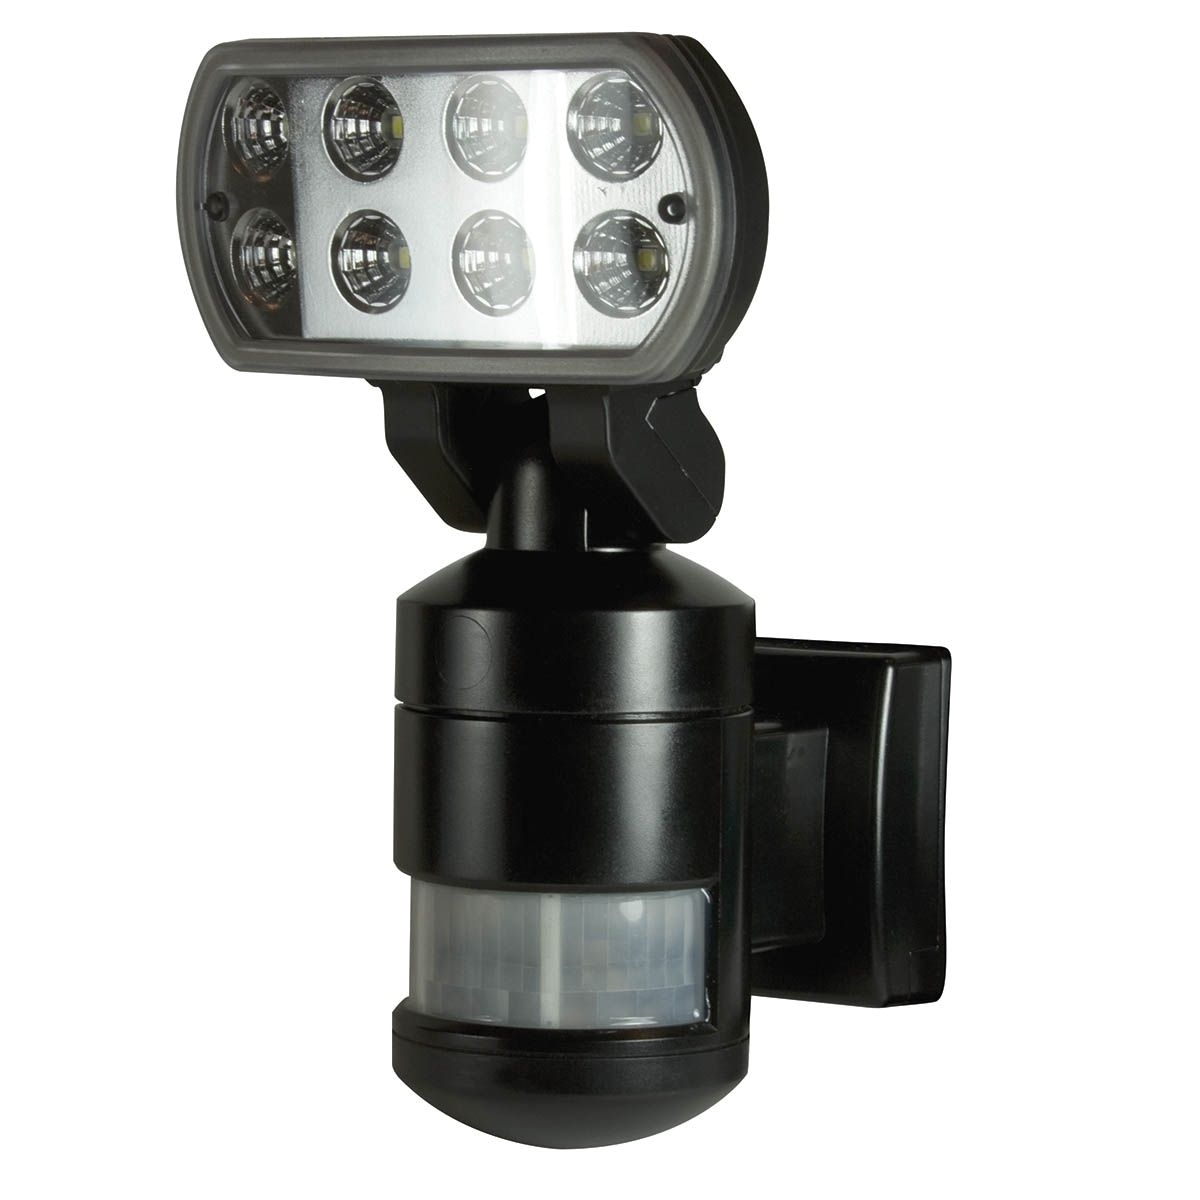 nightwatcher security motion tracking led security light with camera firstly what are led lights